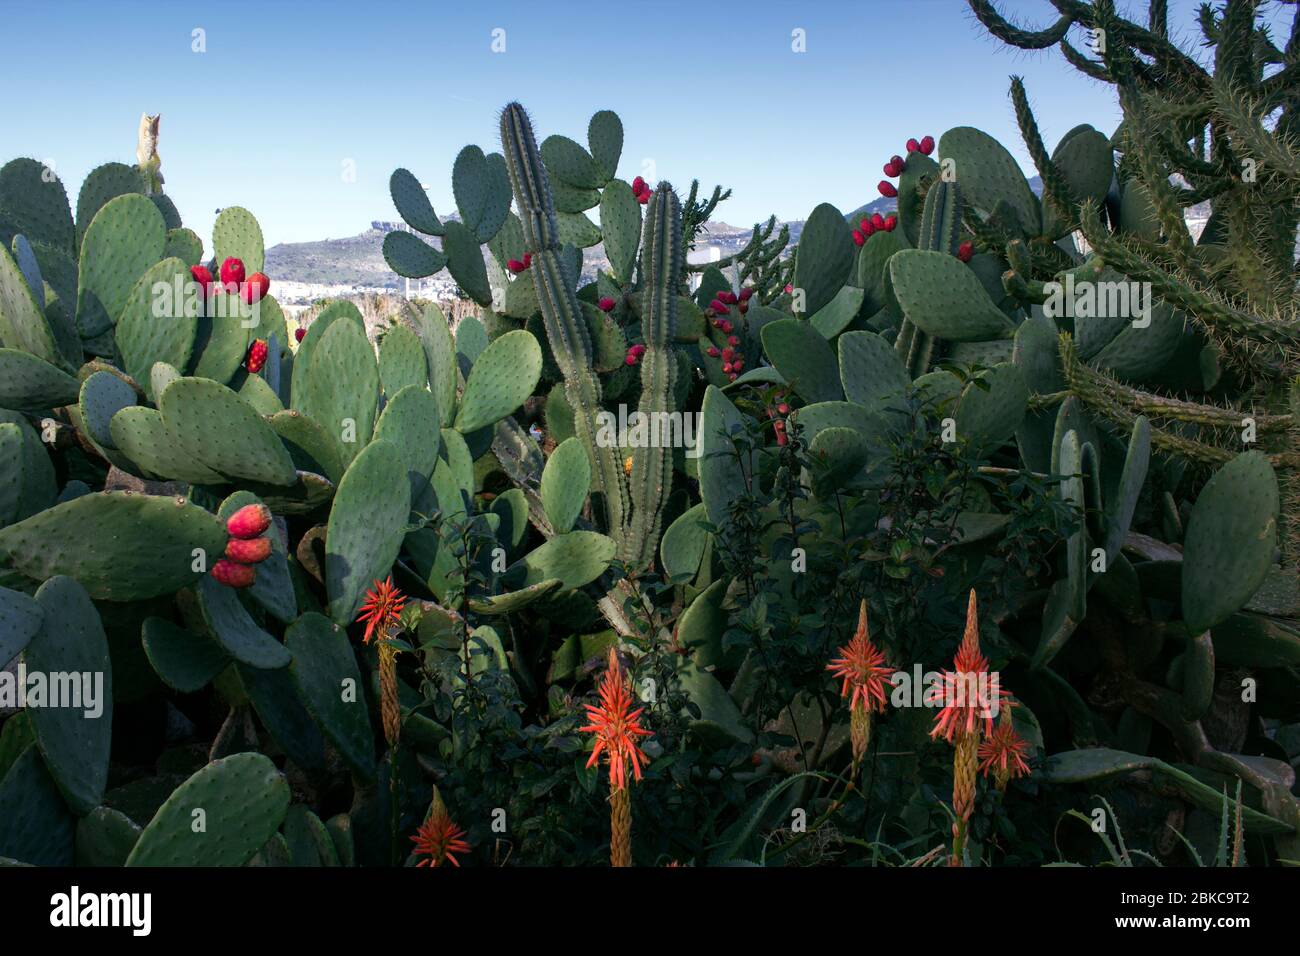 Landscape still life image of a group of various cactus, including Indian fig and aloe vera with fruits and blossoming flowers. Stock Photo